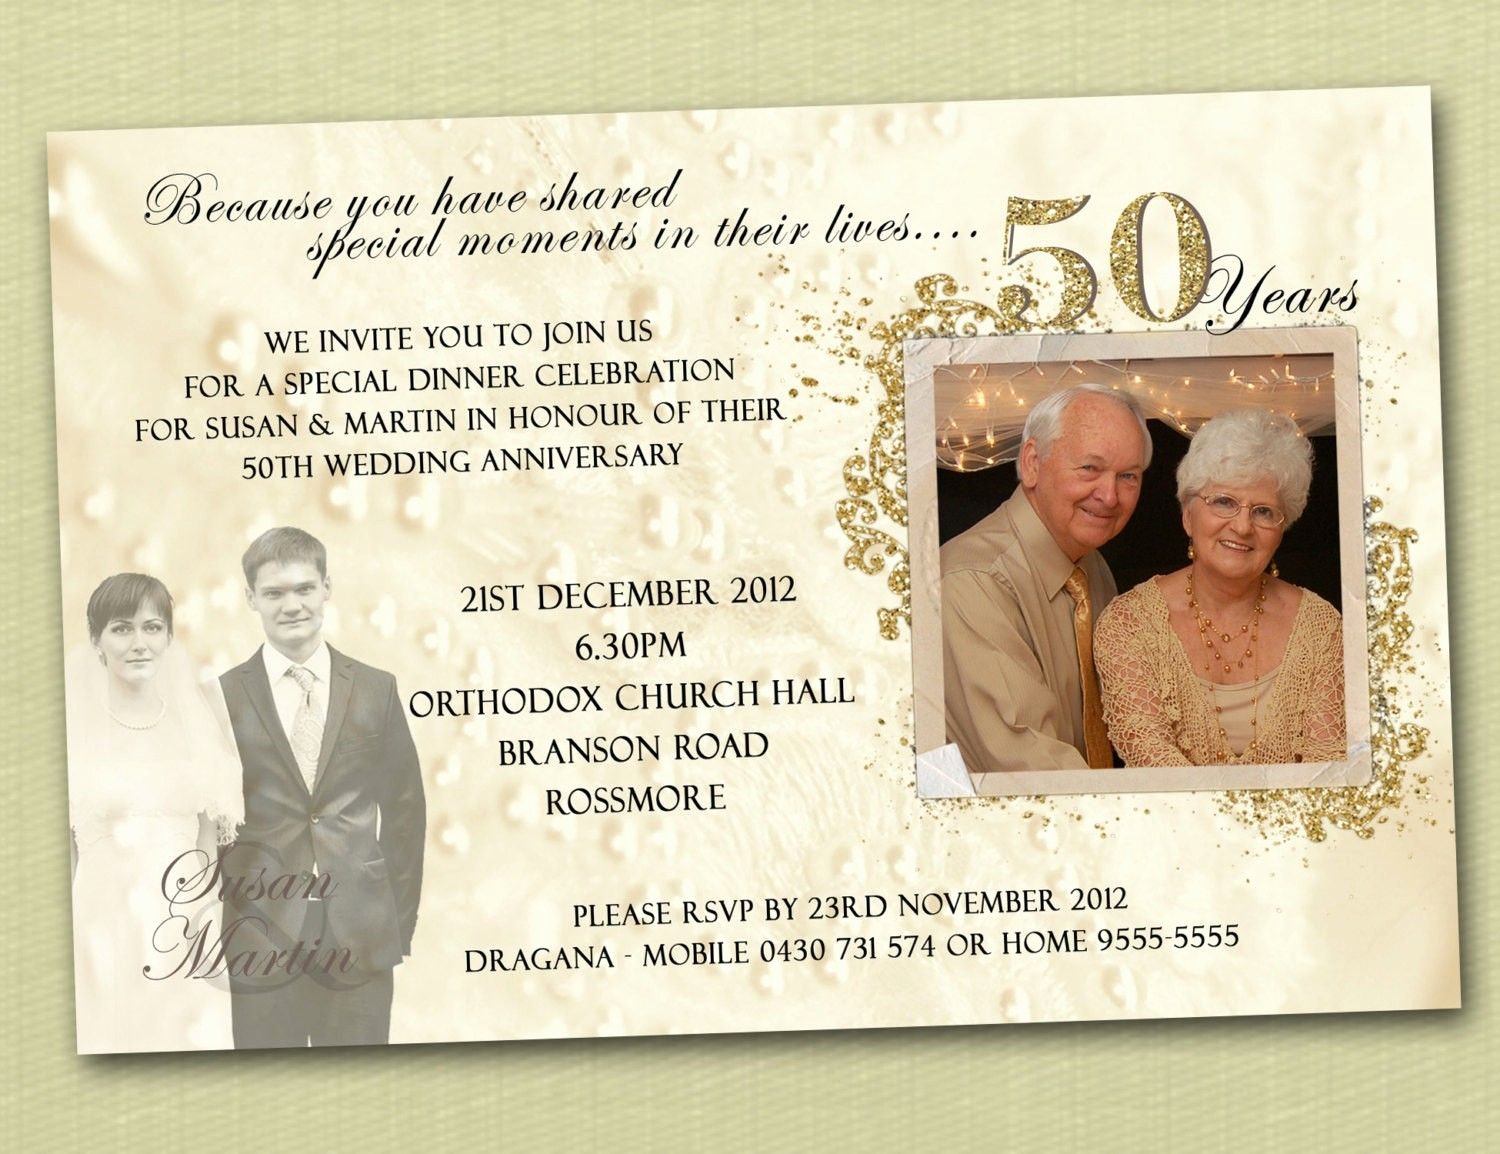 50th Wedding Anniversary Invitations Templates Inspirational Golden Letters On White or Cream 50th Wedding Anniversary Invitations Look Truly Amazing and